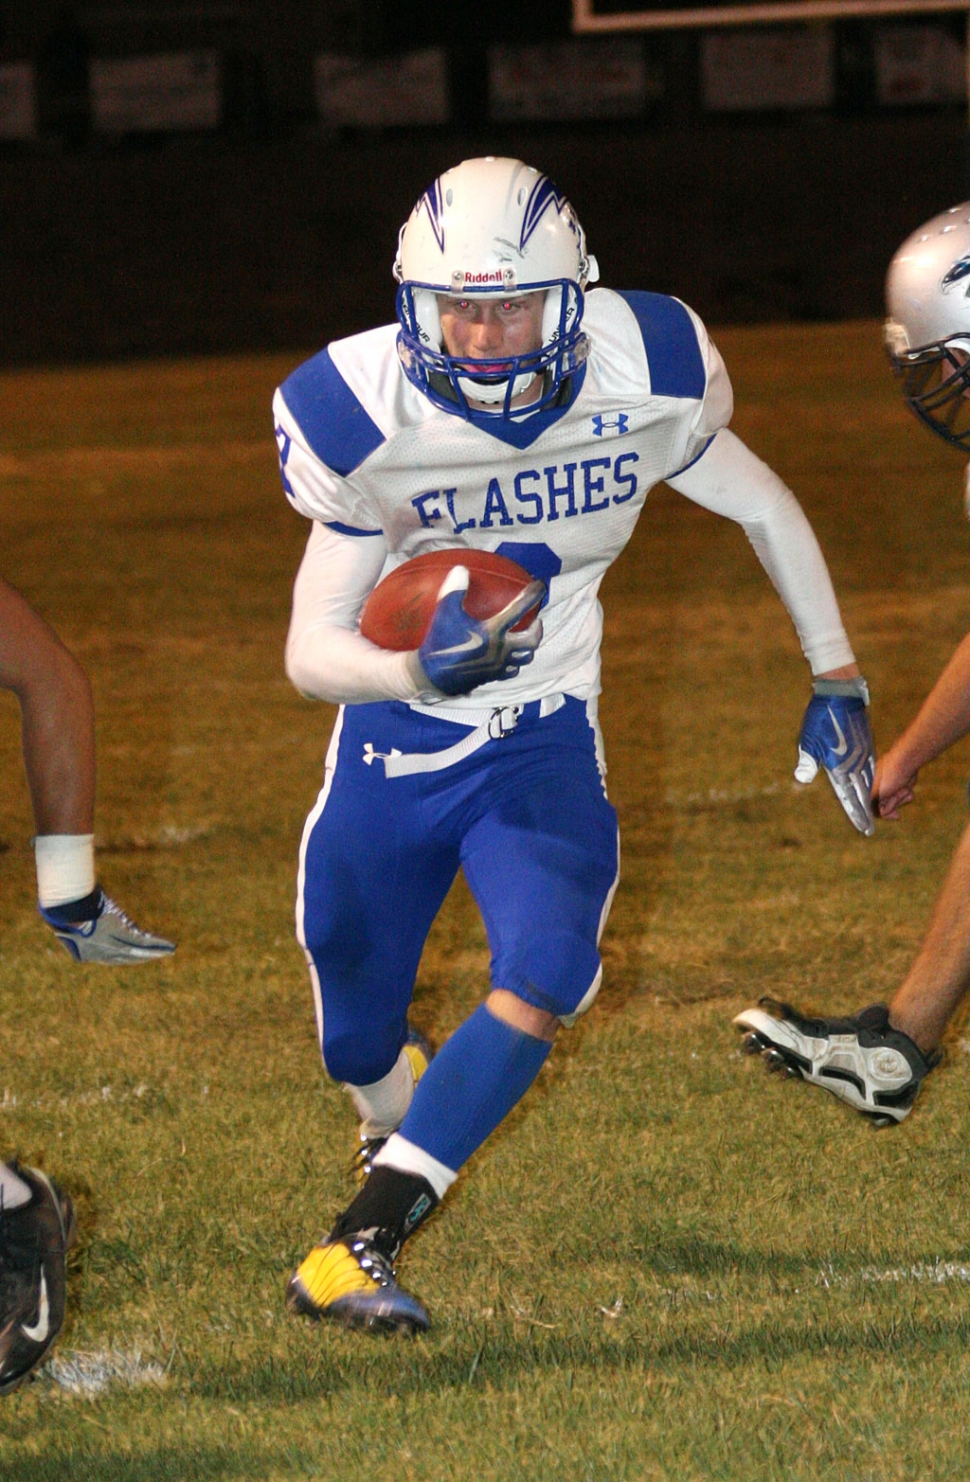 Ty Casey #2 rushed for a touchdown and had 8 tackles, 2 sacks and forced a fumble.